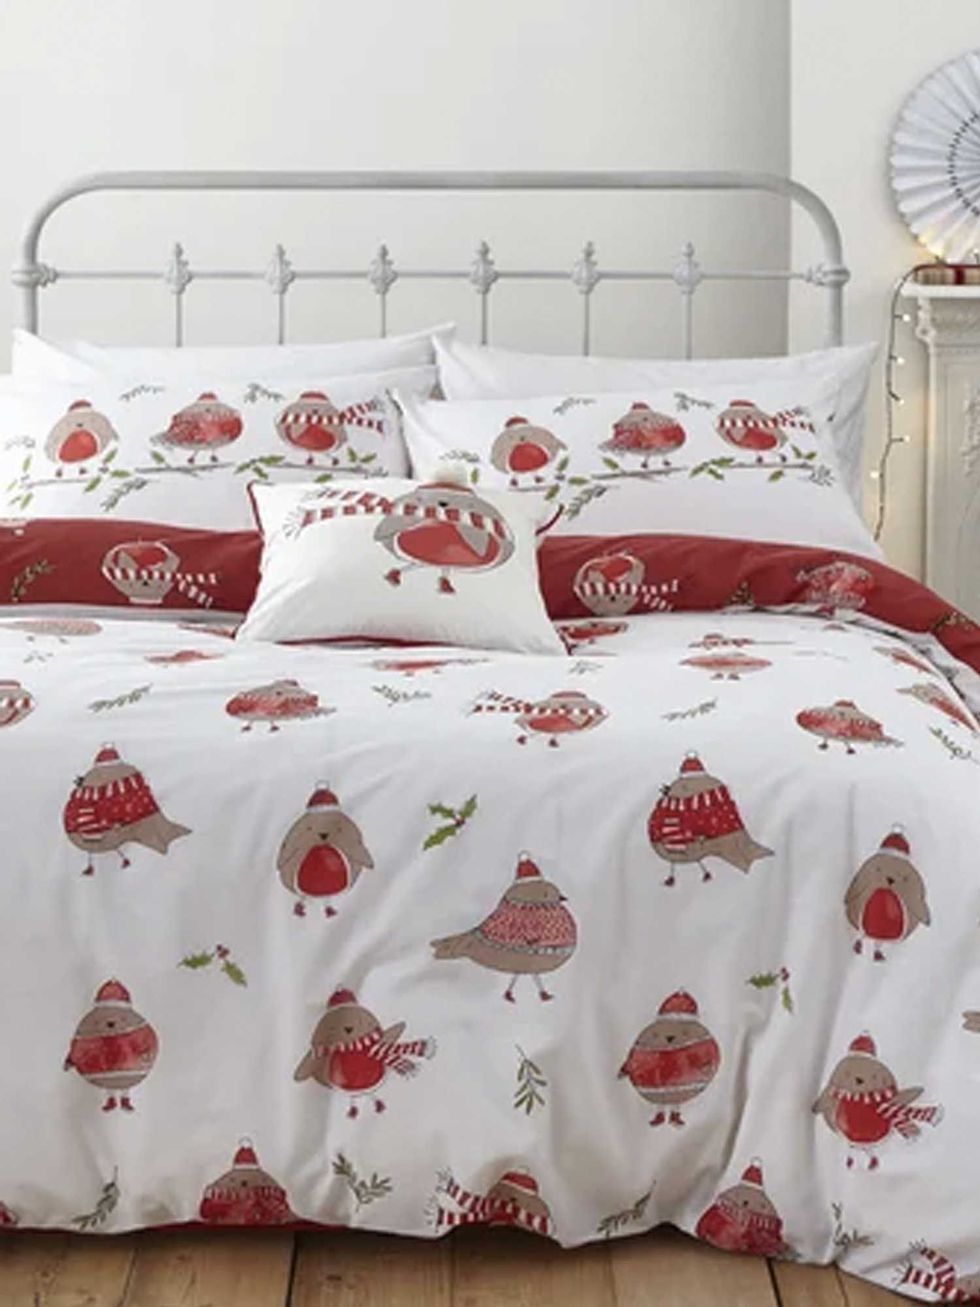 Christmas Robins Duvet Cover Set with Pillowcases, from £15